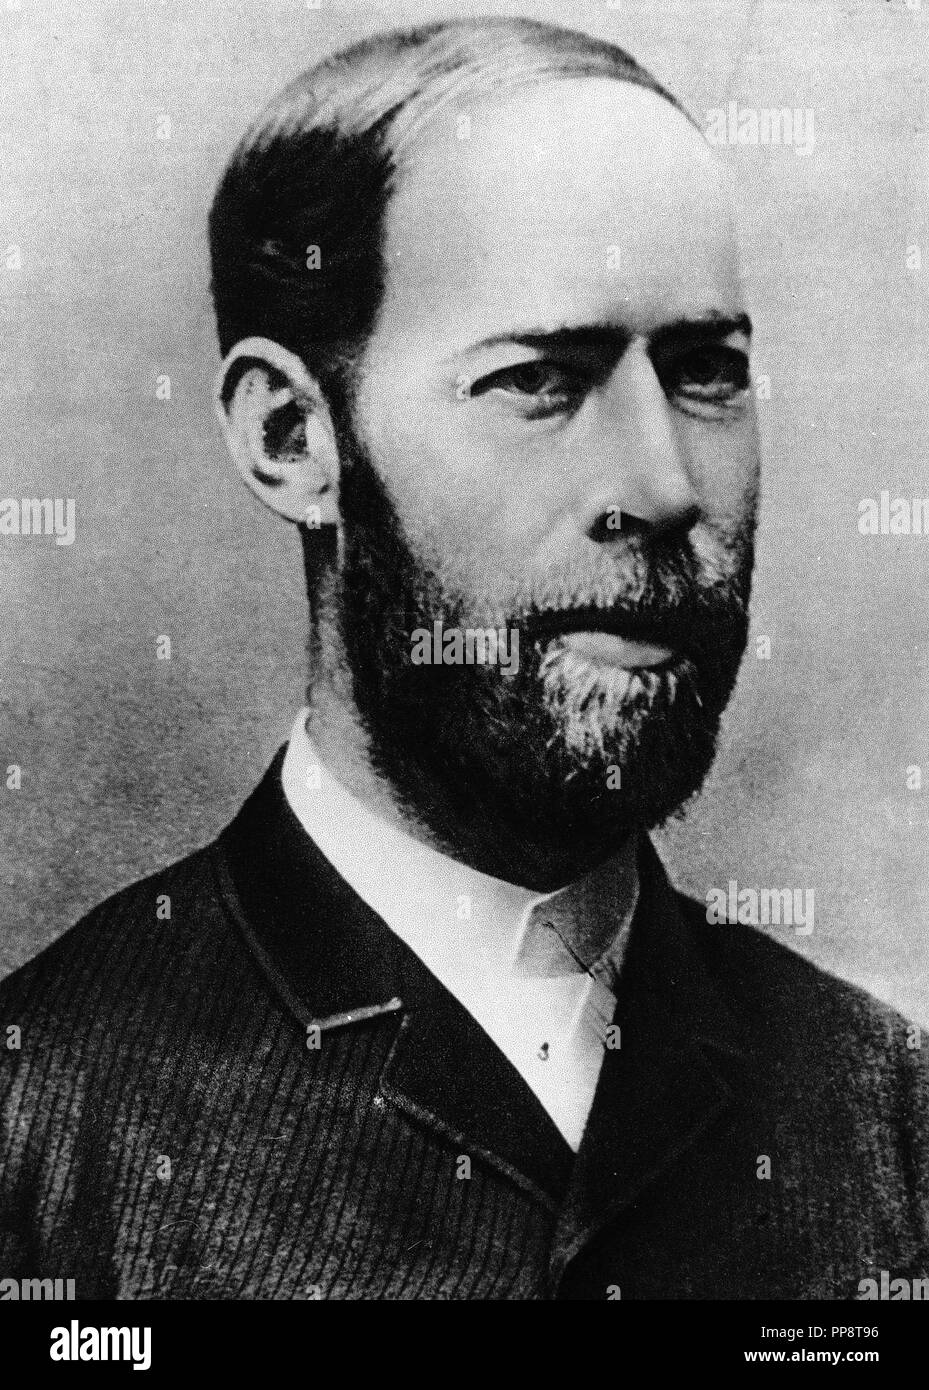 HEINRICH RUDOLPH HERTZ (1857/1894) - GERMAN PHYSICIST - DISCOVERED OF THE PHOTELECTRIC EFFECT AND THE PROPAGATION OF ELECTROMAGNETIC WAVES. Stock Photo